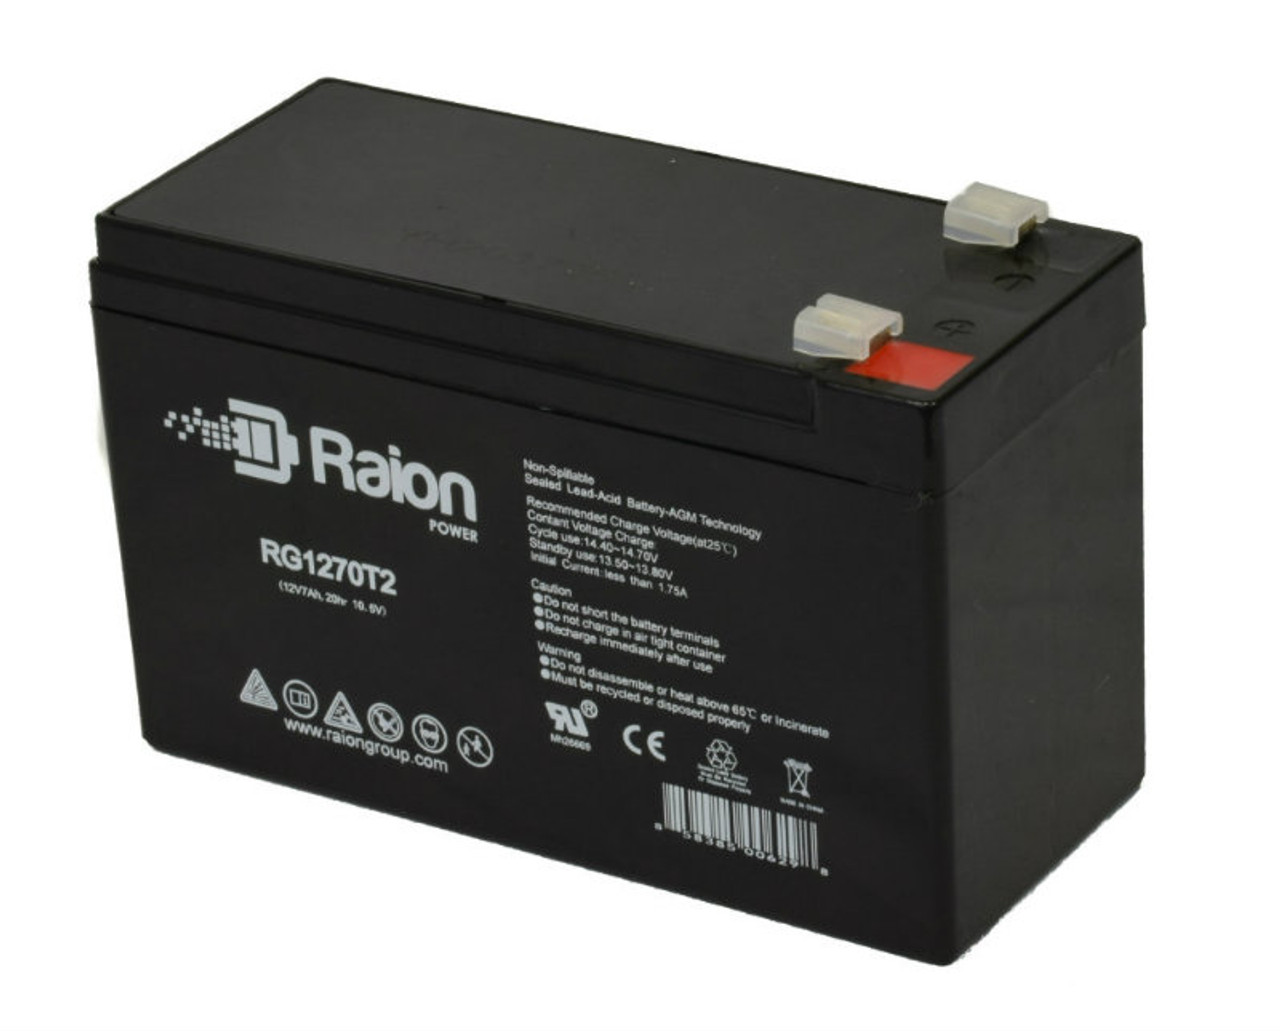 Raion Power Replacement 12V 7Ah RG1270T1 Fire Alarm Battery for Digital Security PC4050C